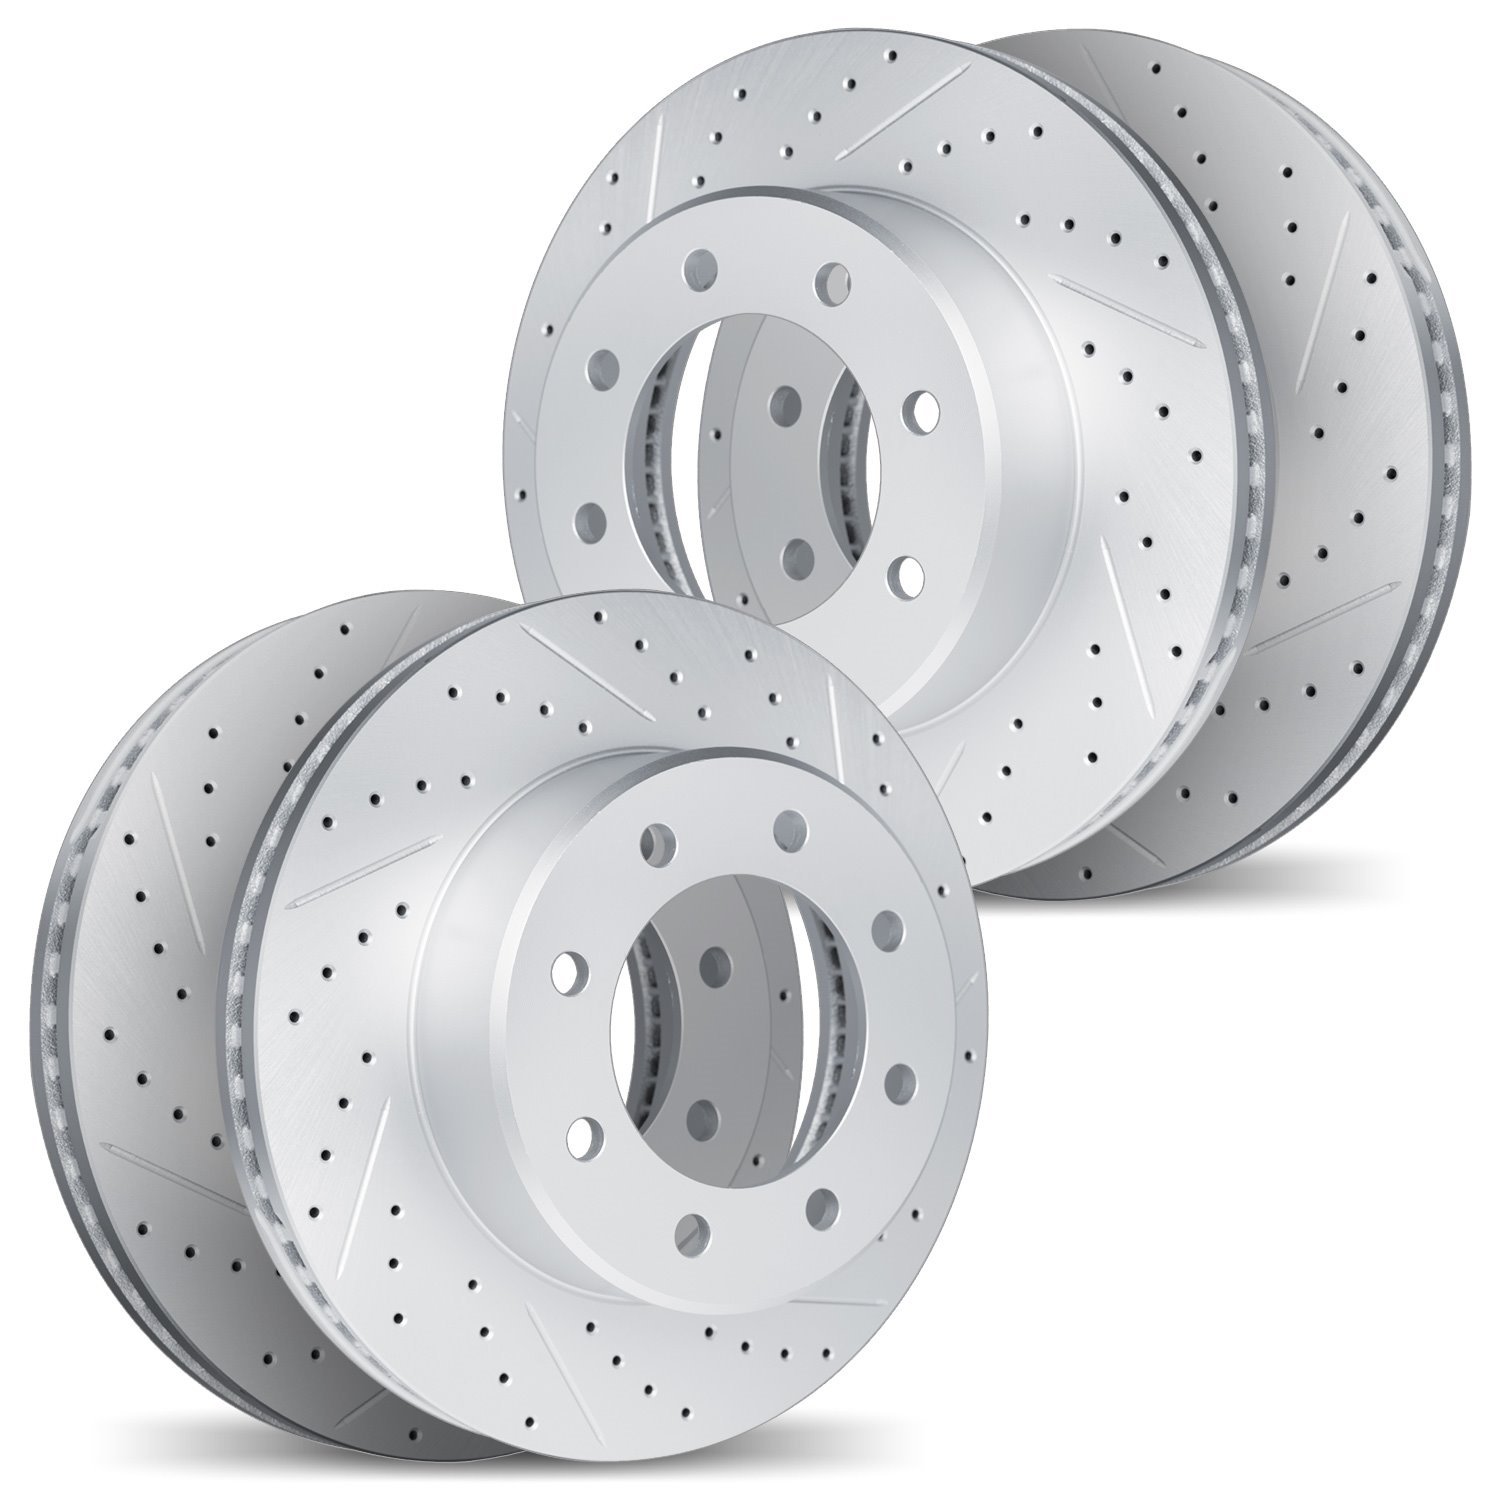 2004-67053 Geoperformance Drilled/Slotted Brake Rotors, 2012-2021 Infiniti/Nissan, Position: Front and Rear